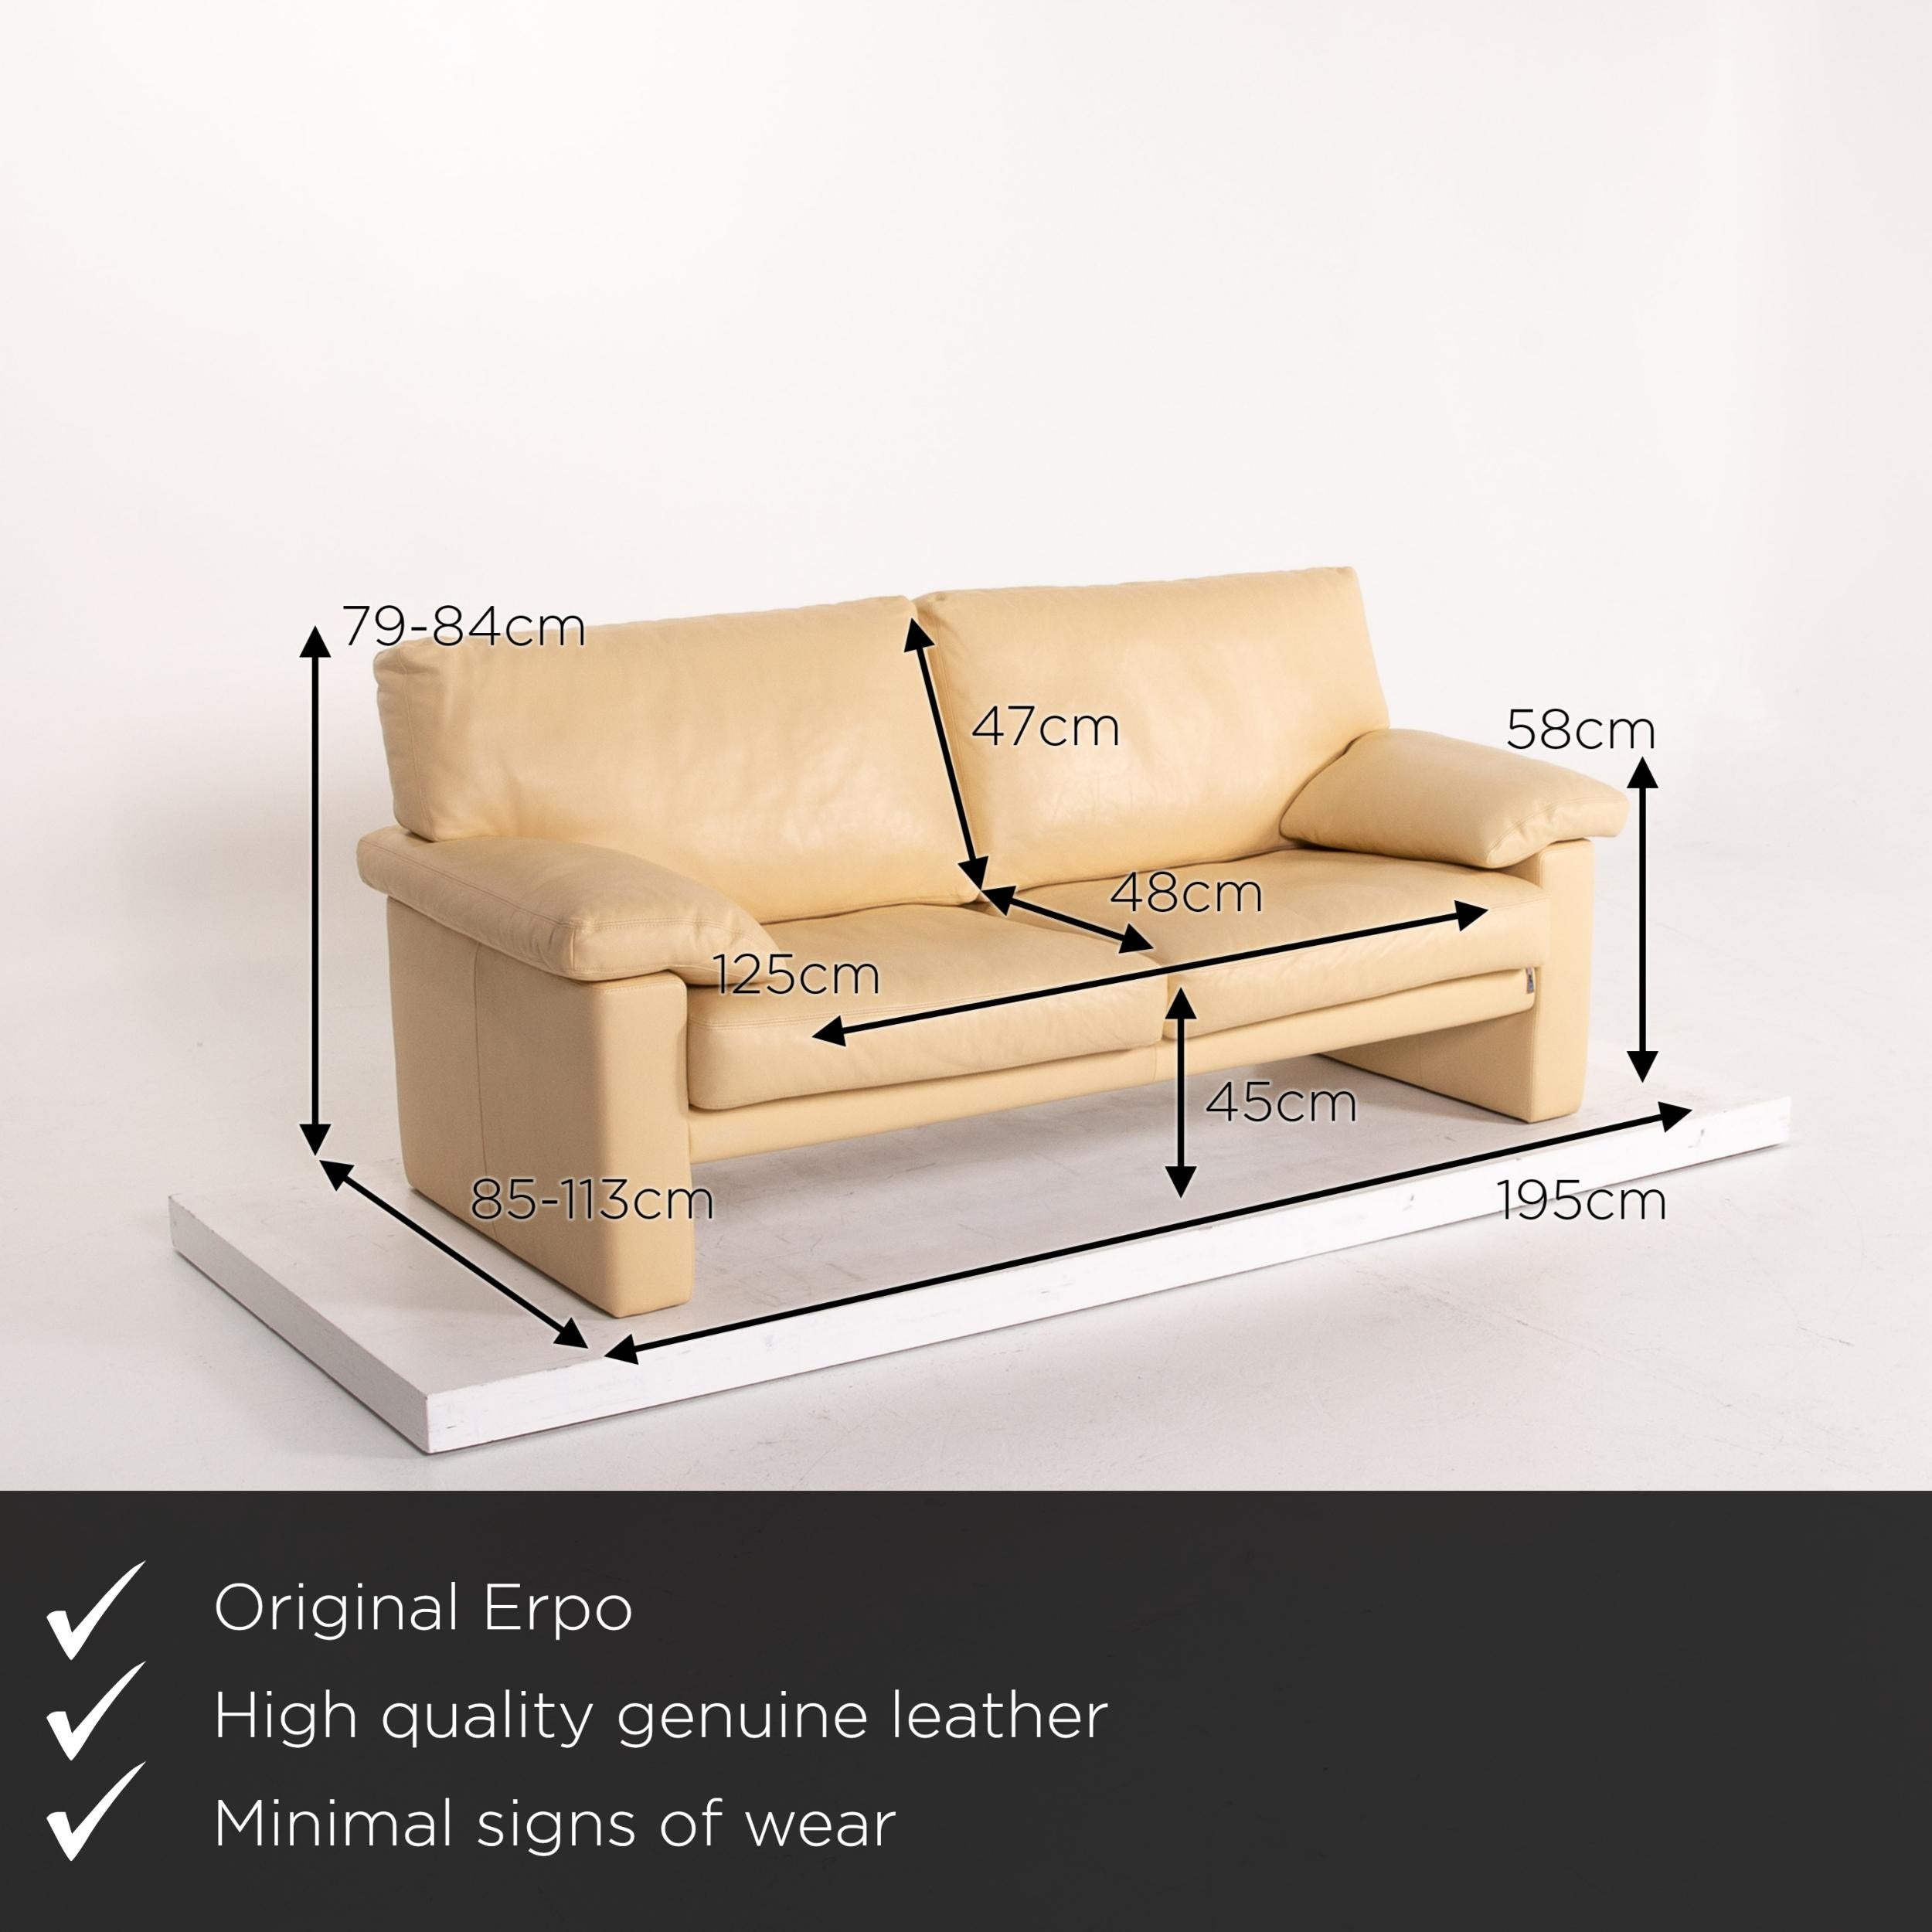 We present to you an Erpo leather sofa beige two-seat couch.

 

 Product measurements in centimeters:
 

Depth 85
Width 195
Height 79
Seat height 45
Rest height 58
Seat depth 48
Seat width 125
Back height 47.

  